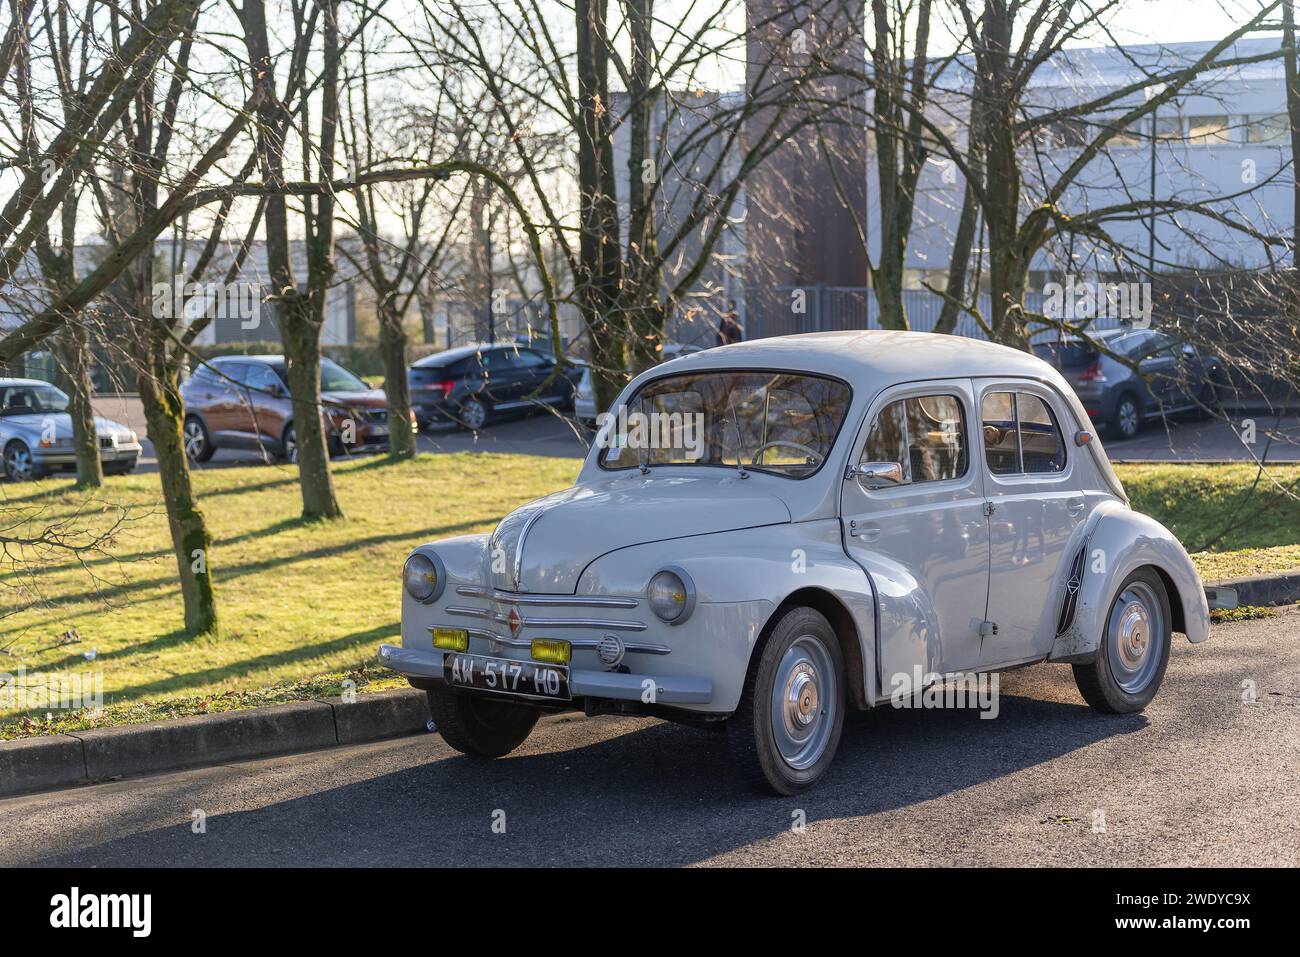 Nancy, France - White Renault 4CV parked in a parking lot. Stock Photo